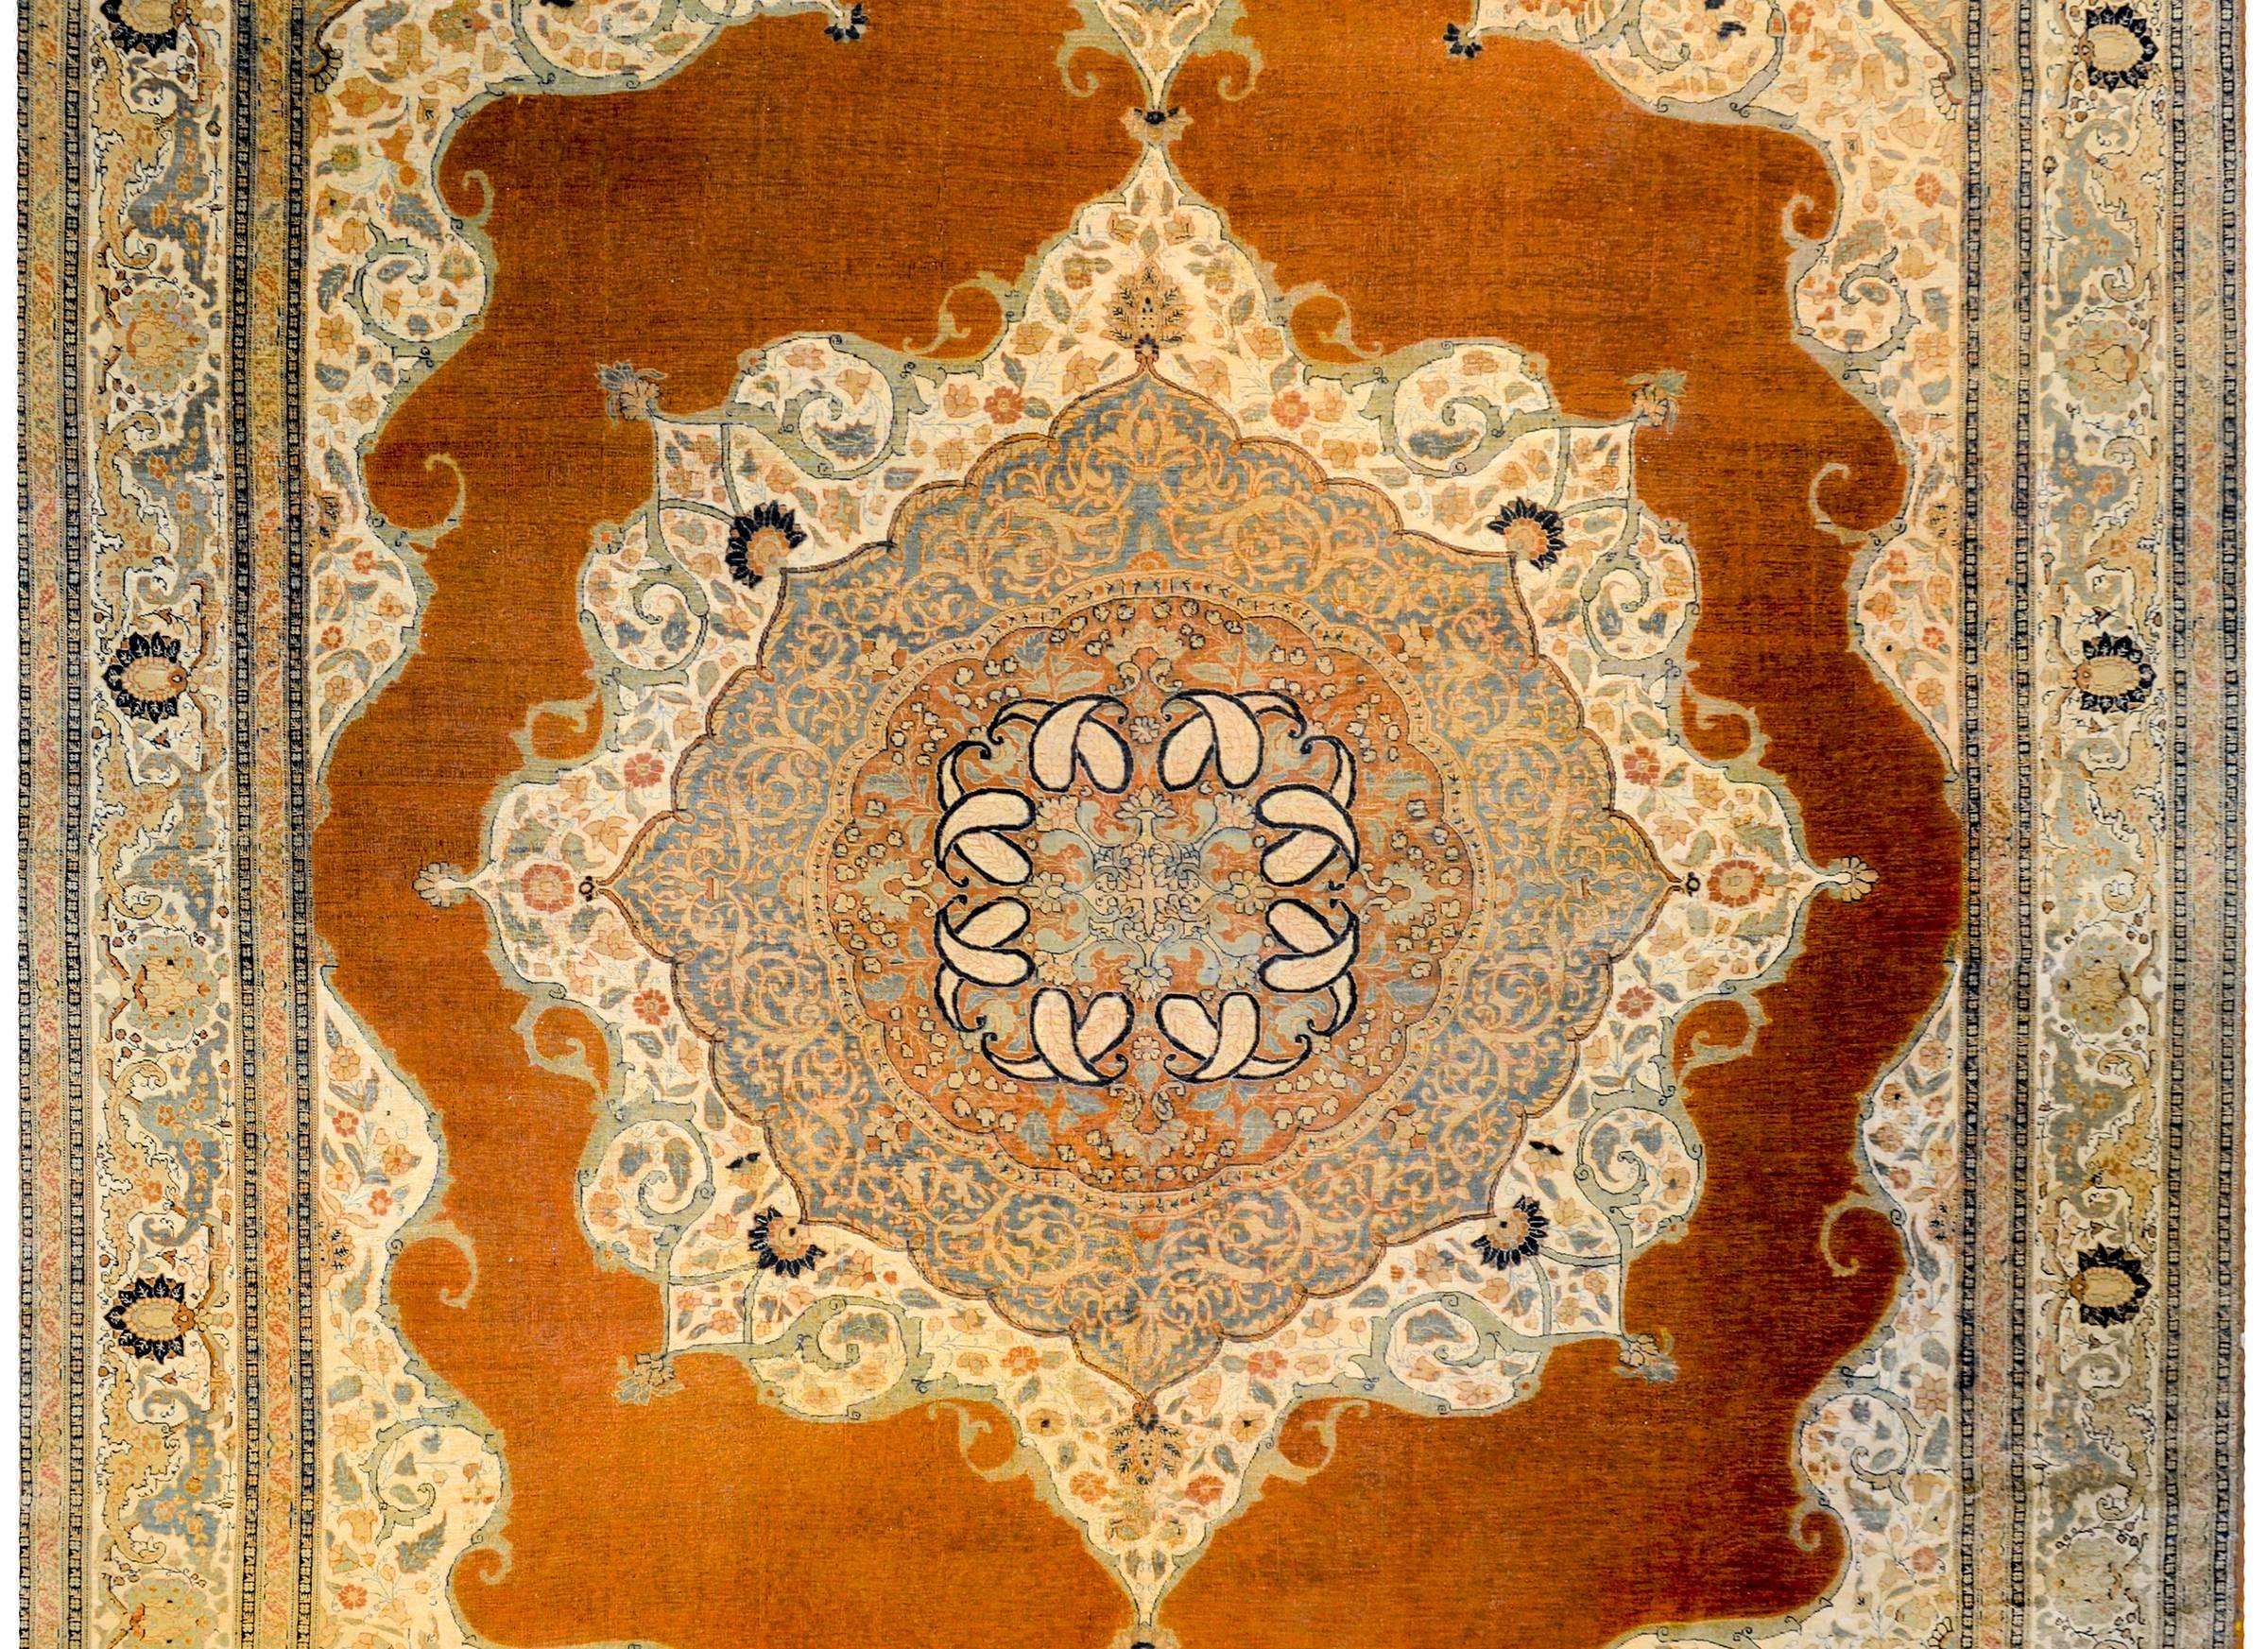 A wonderful late 19th century Persian Tabriz Haji Jalili rug with a mesmerizing pattern of intricately and tightly woven pattern of multicolored flowers on a bold orange background. The border is complex with a large central floral and leaf